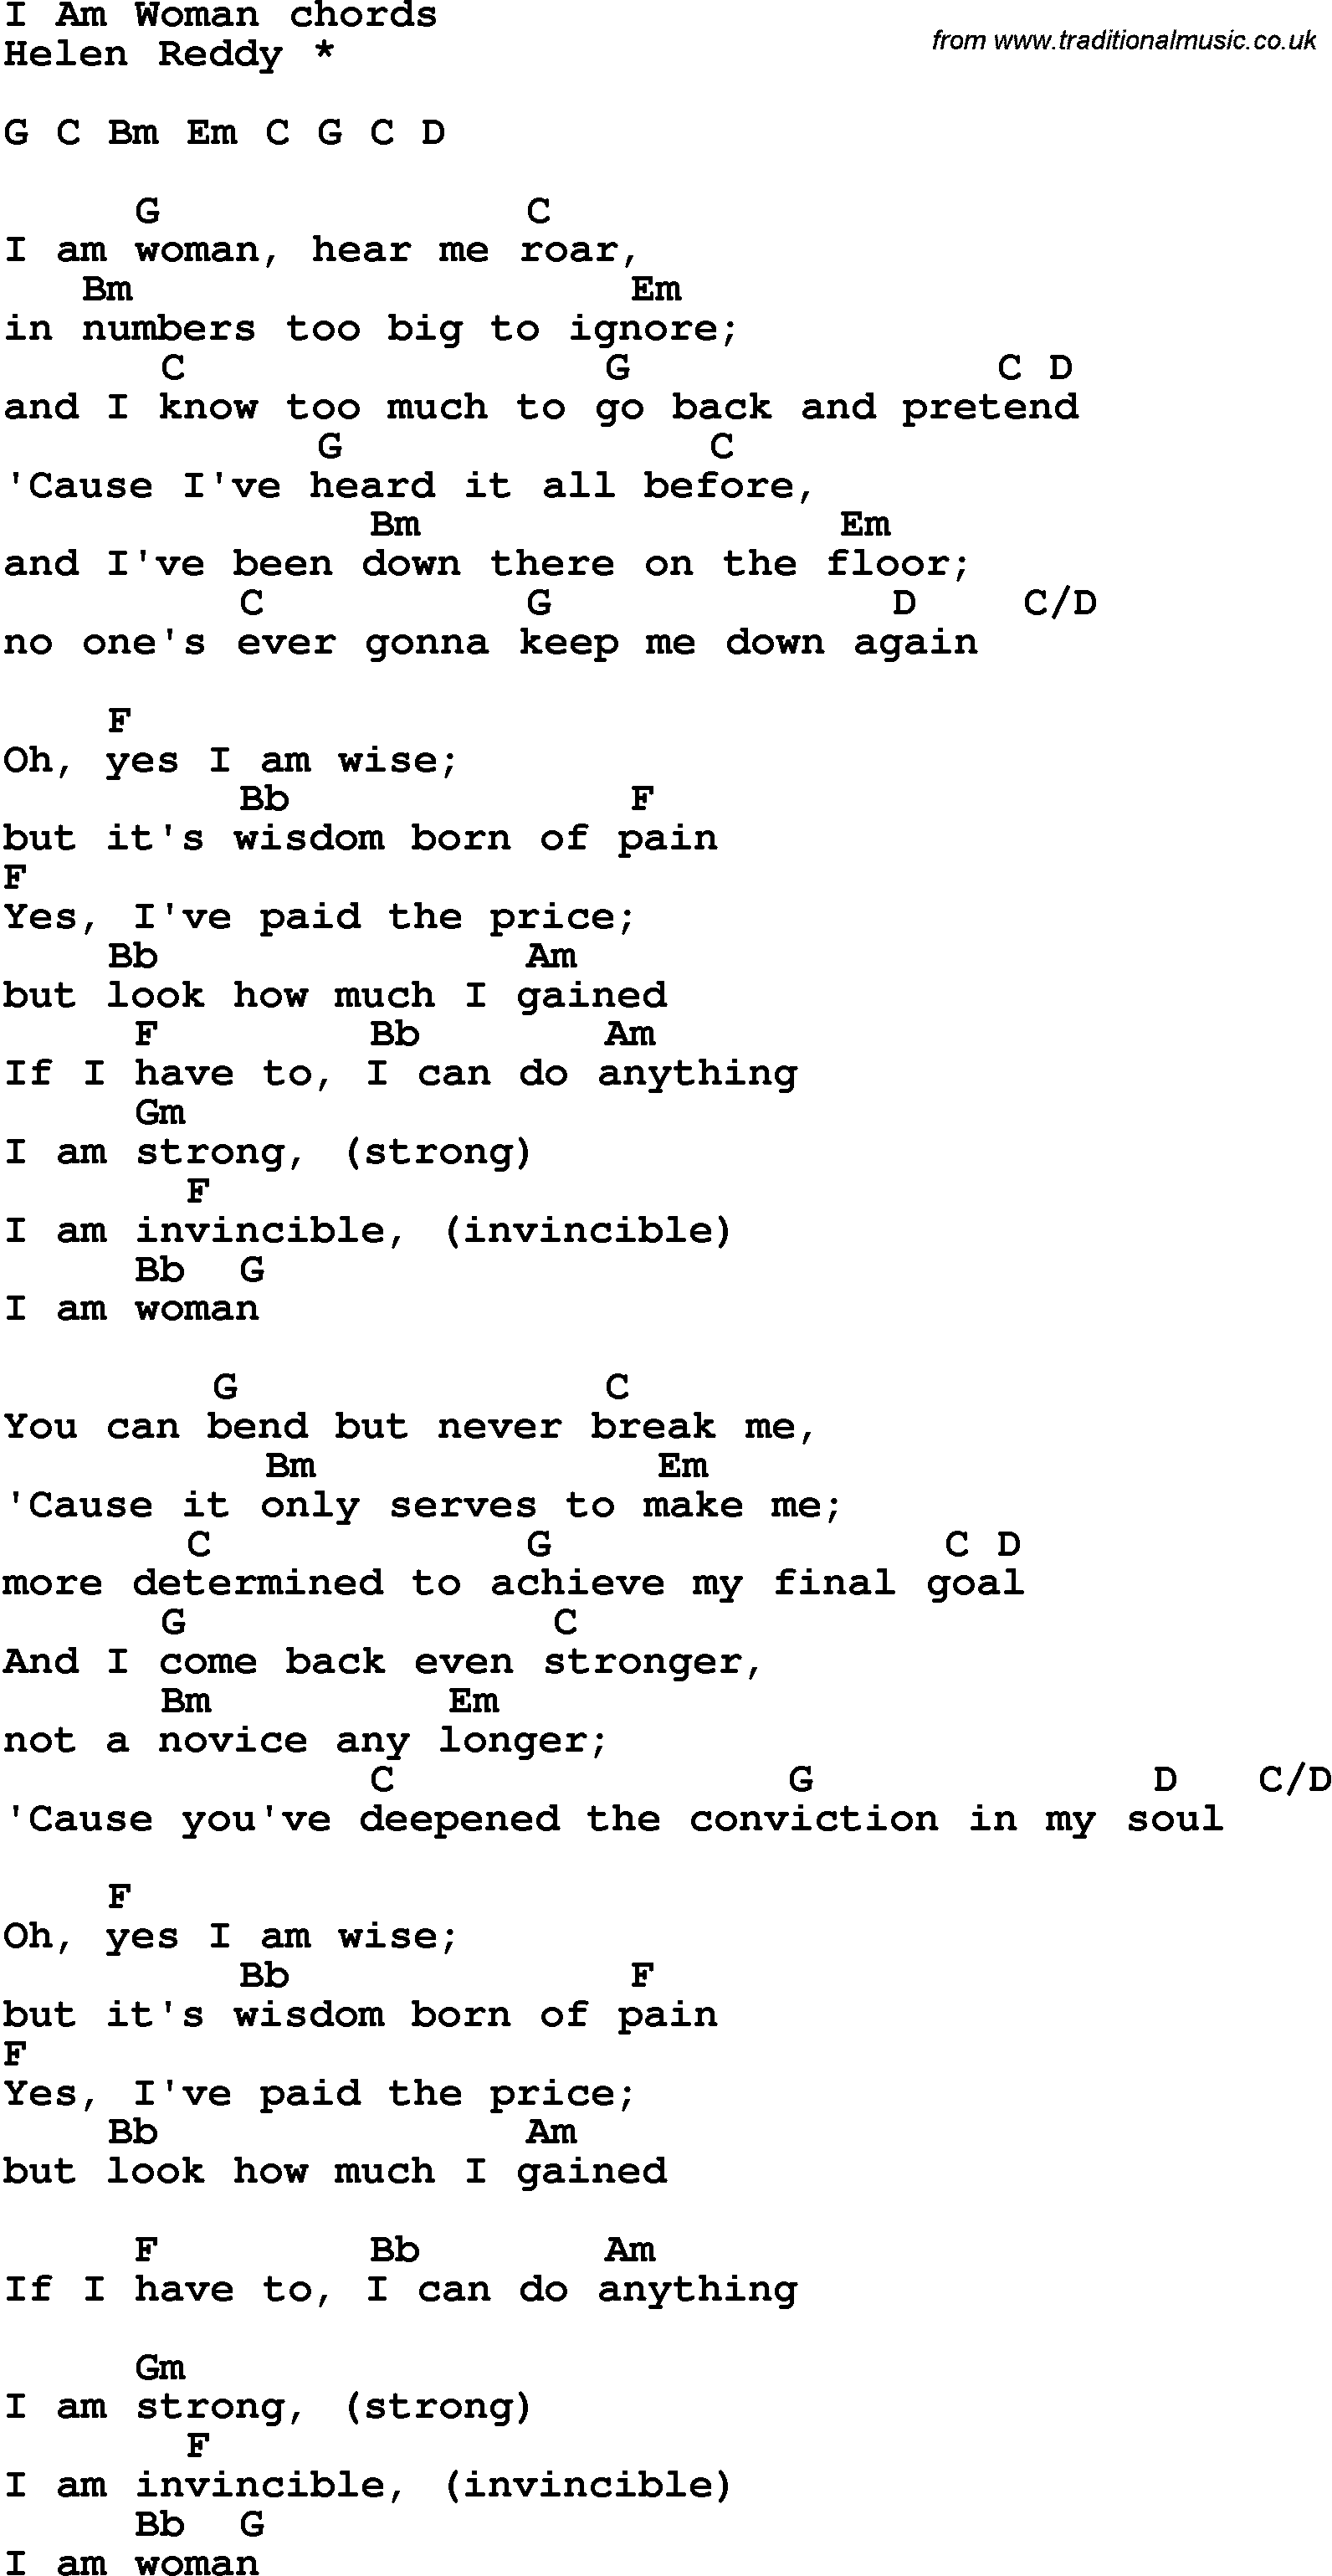 Song Lyrics with guitar chords for I Am Woman